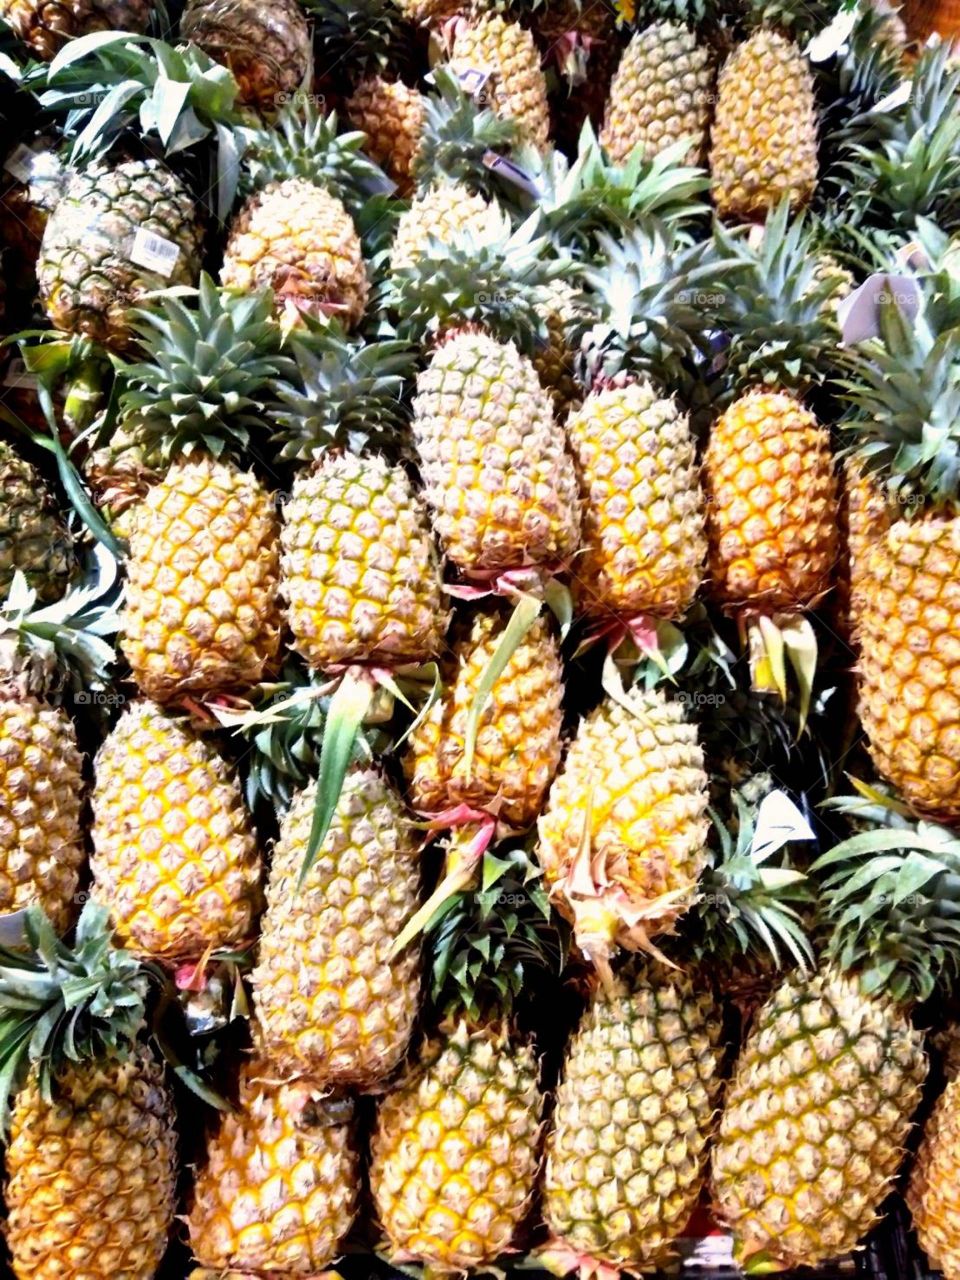 Pineapple for sale in the supermarket.